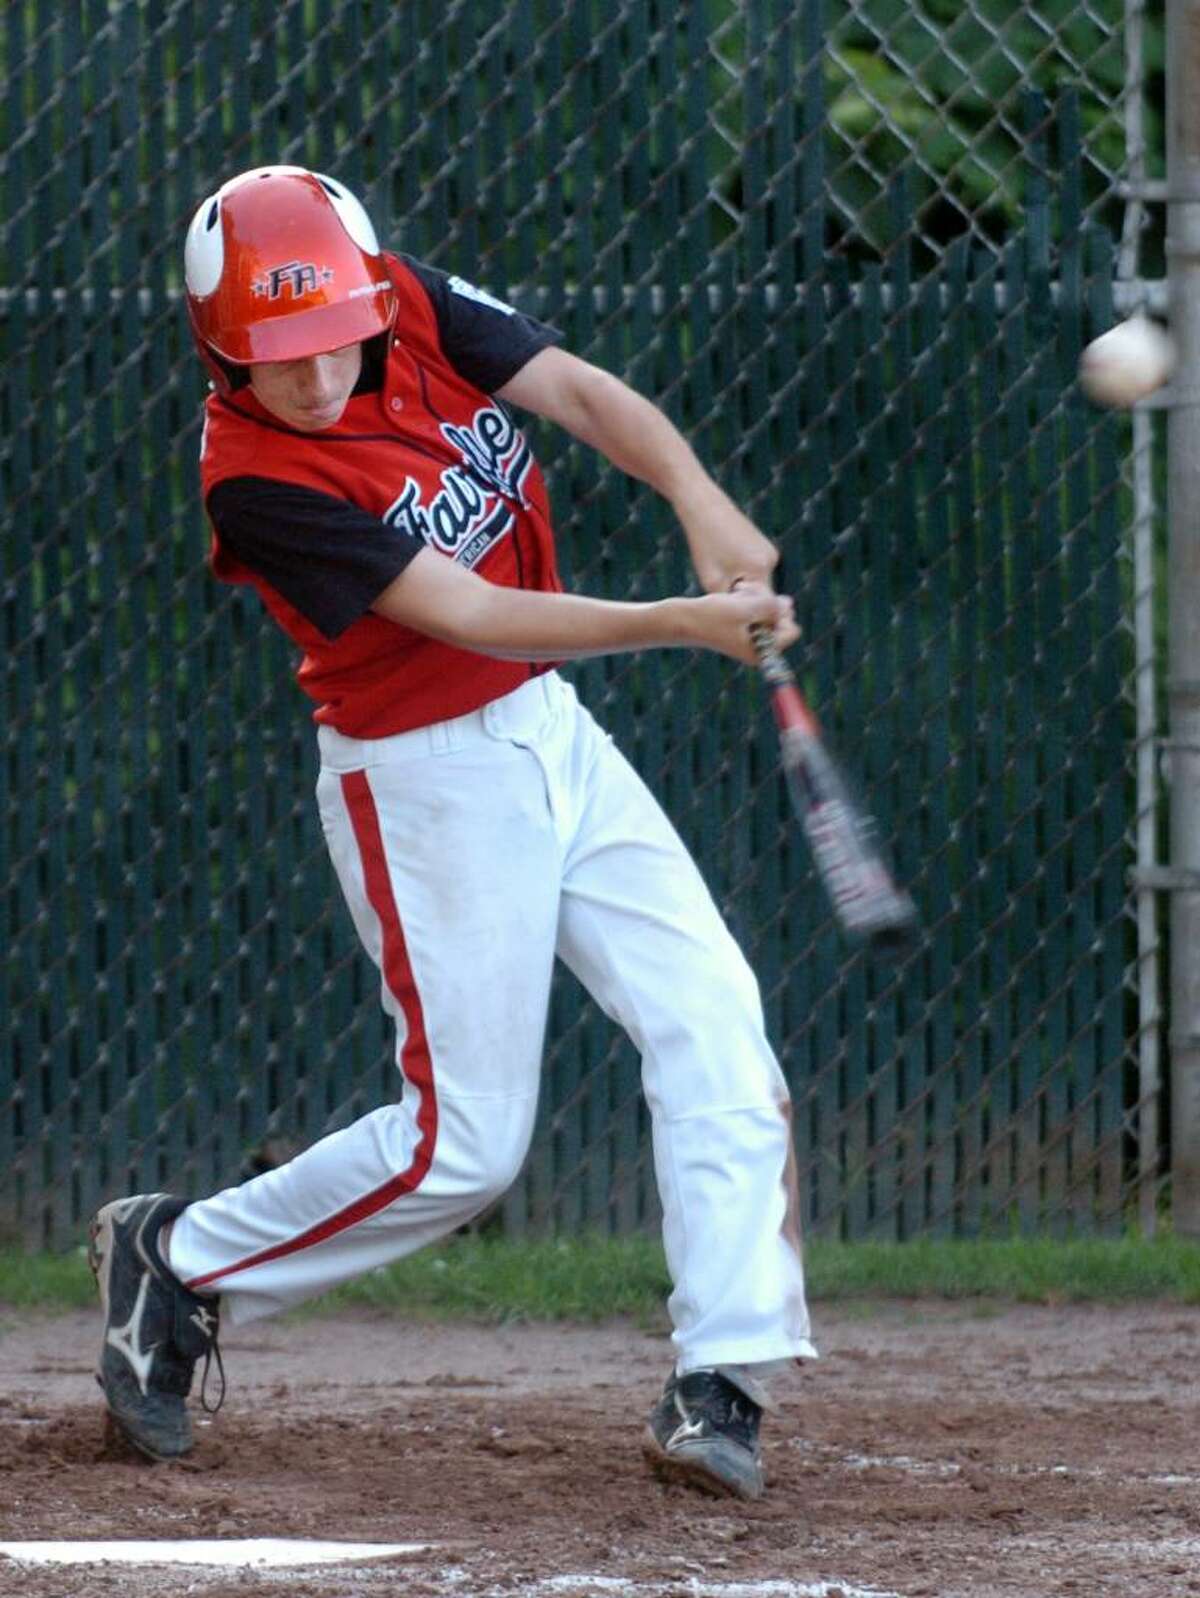 Fairfield American's Nick Nardone gets a hit during the District 2 little league tournament game against Monroe Thursday July 15, 2010 at Blackham School field in Bridgeport.